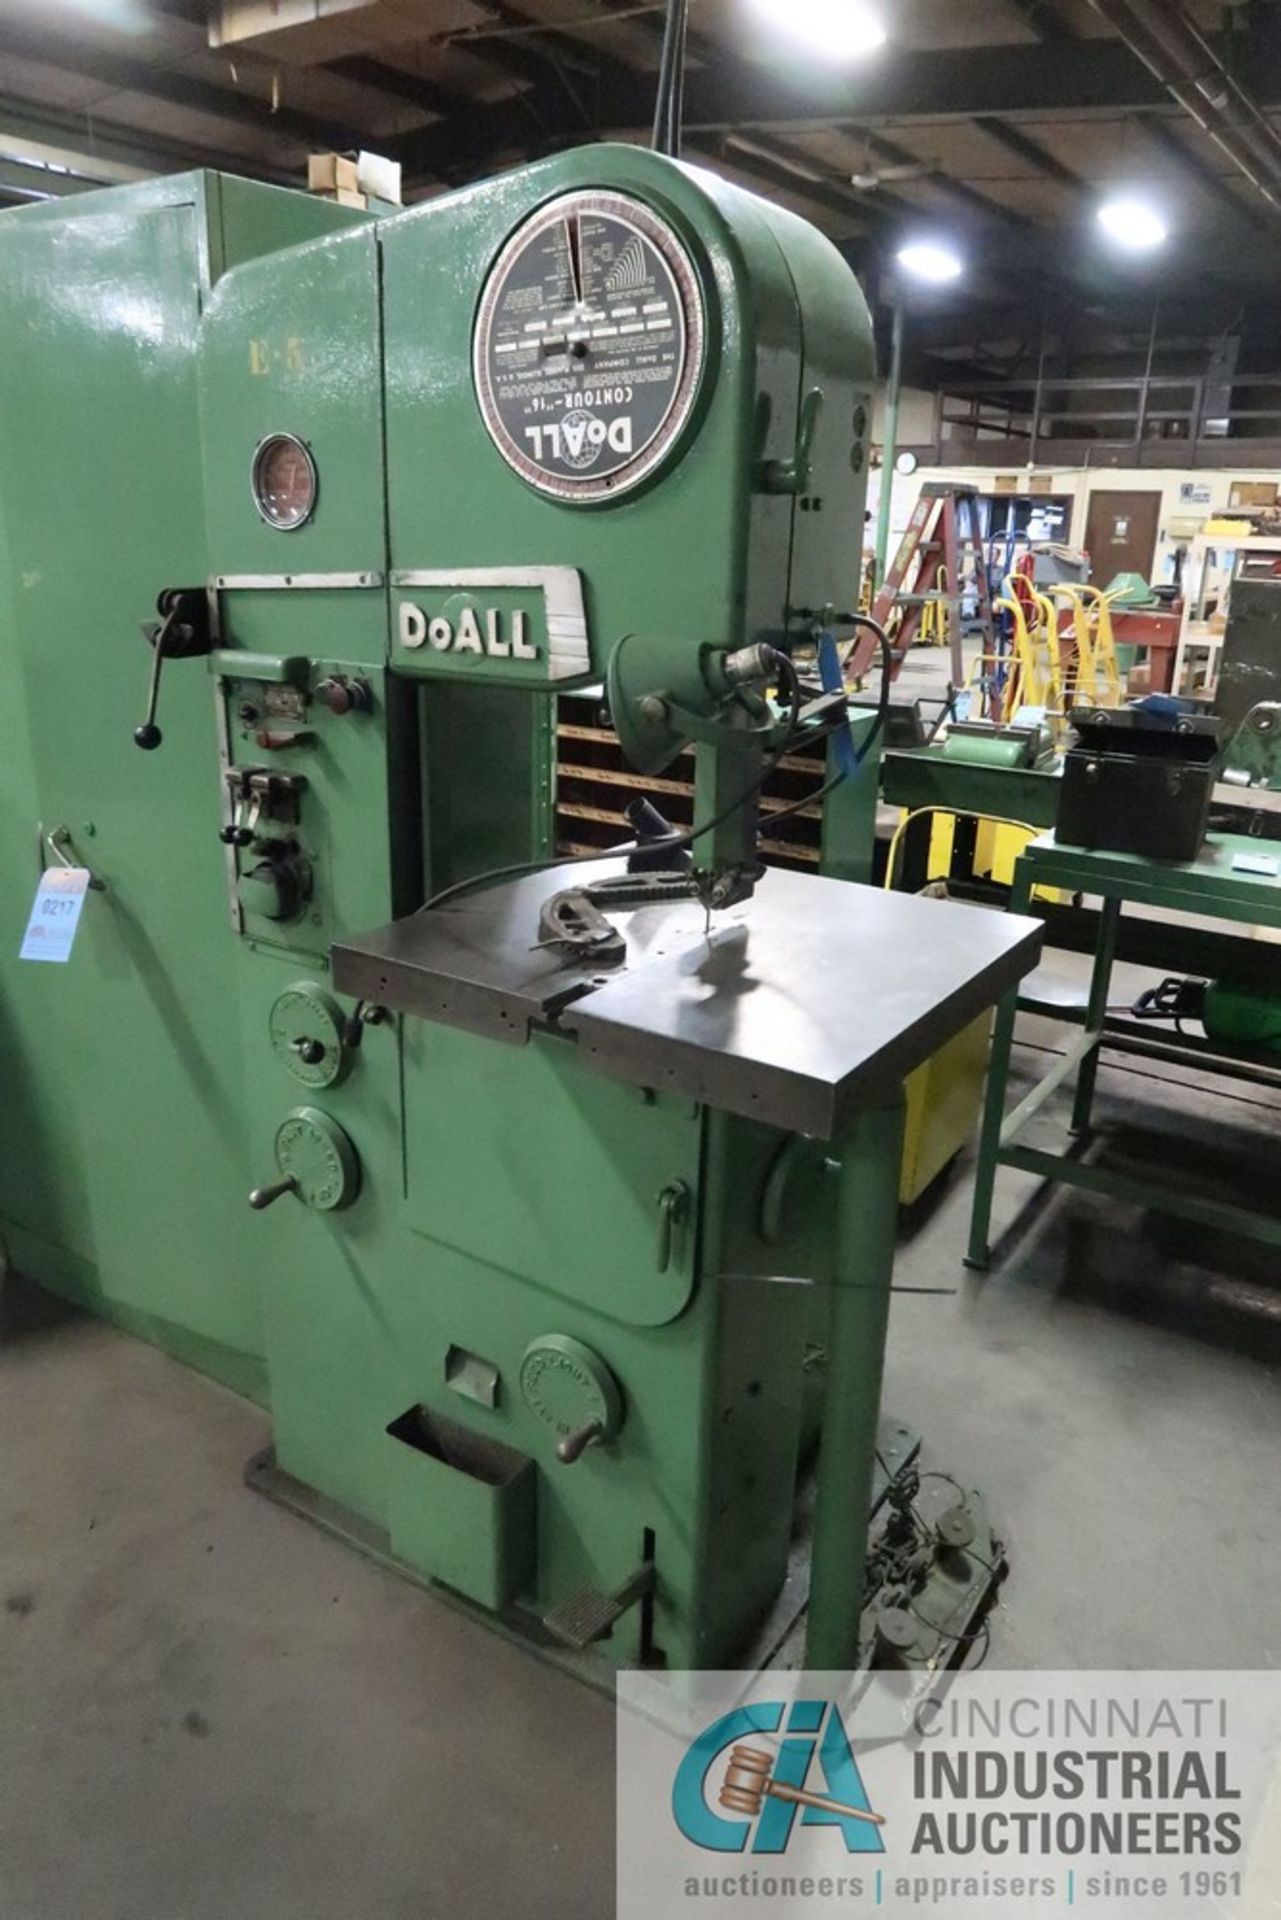 16" DOALL MODEL 16-2 CONTOUR VERTICAL BAND SAW; S/N 45-56703, 24" X 24" TABLE, BAND WELDER